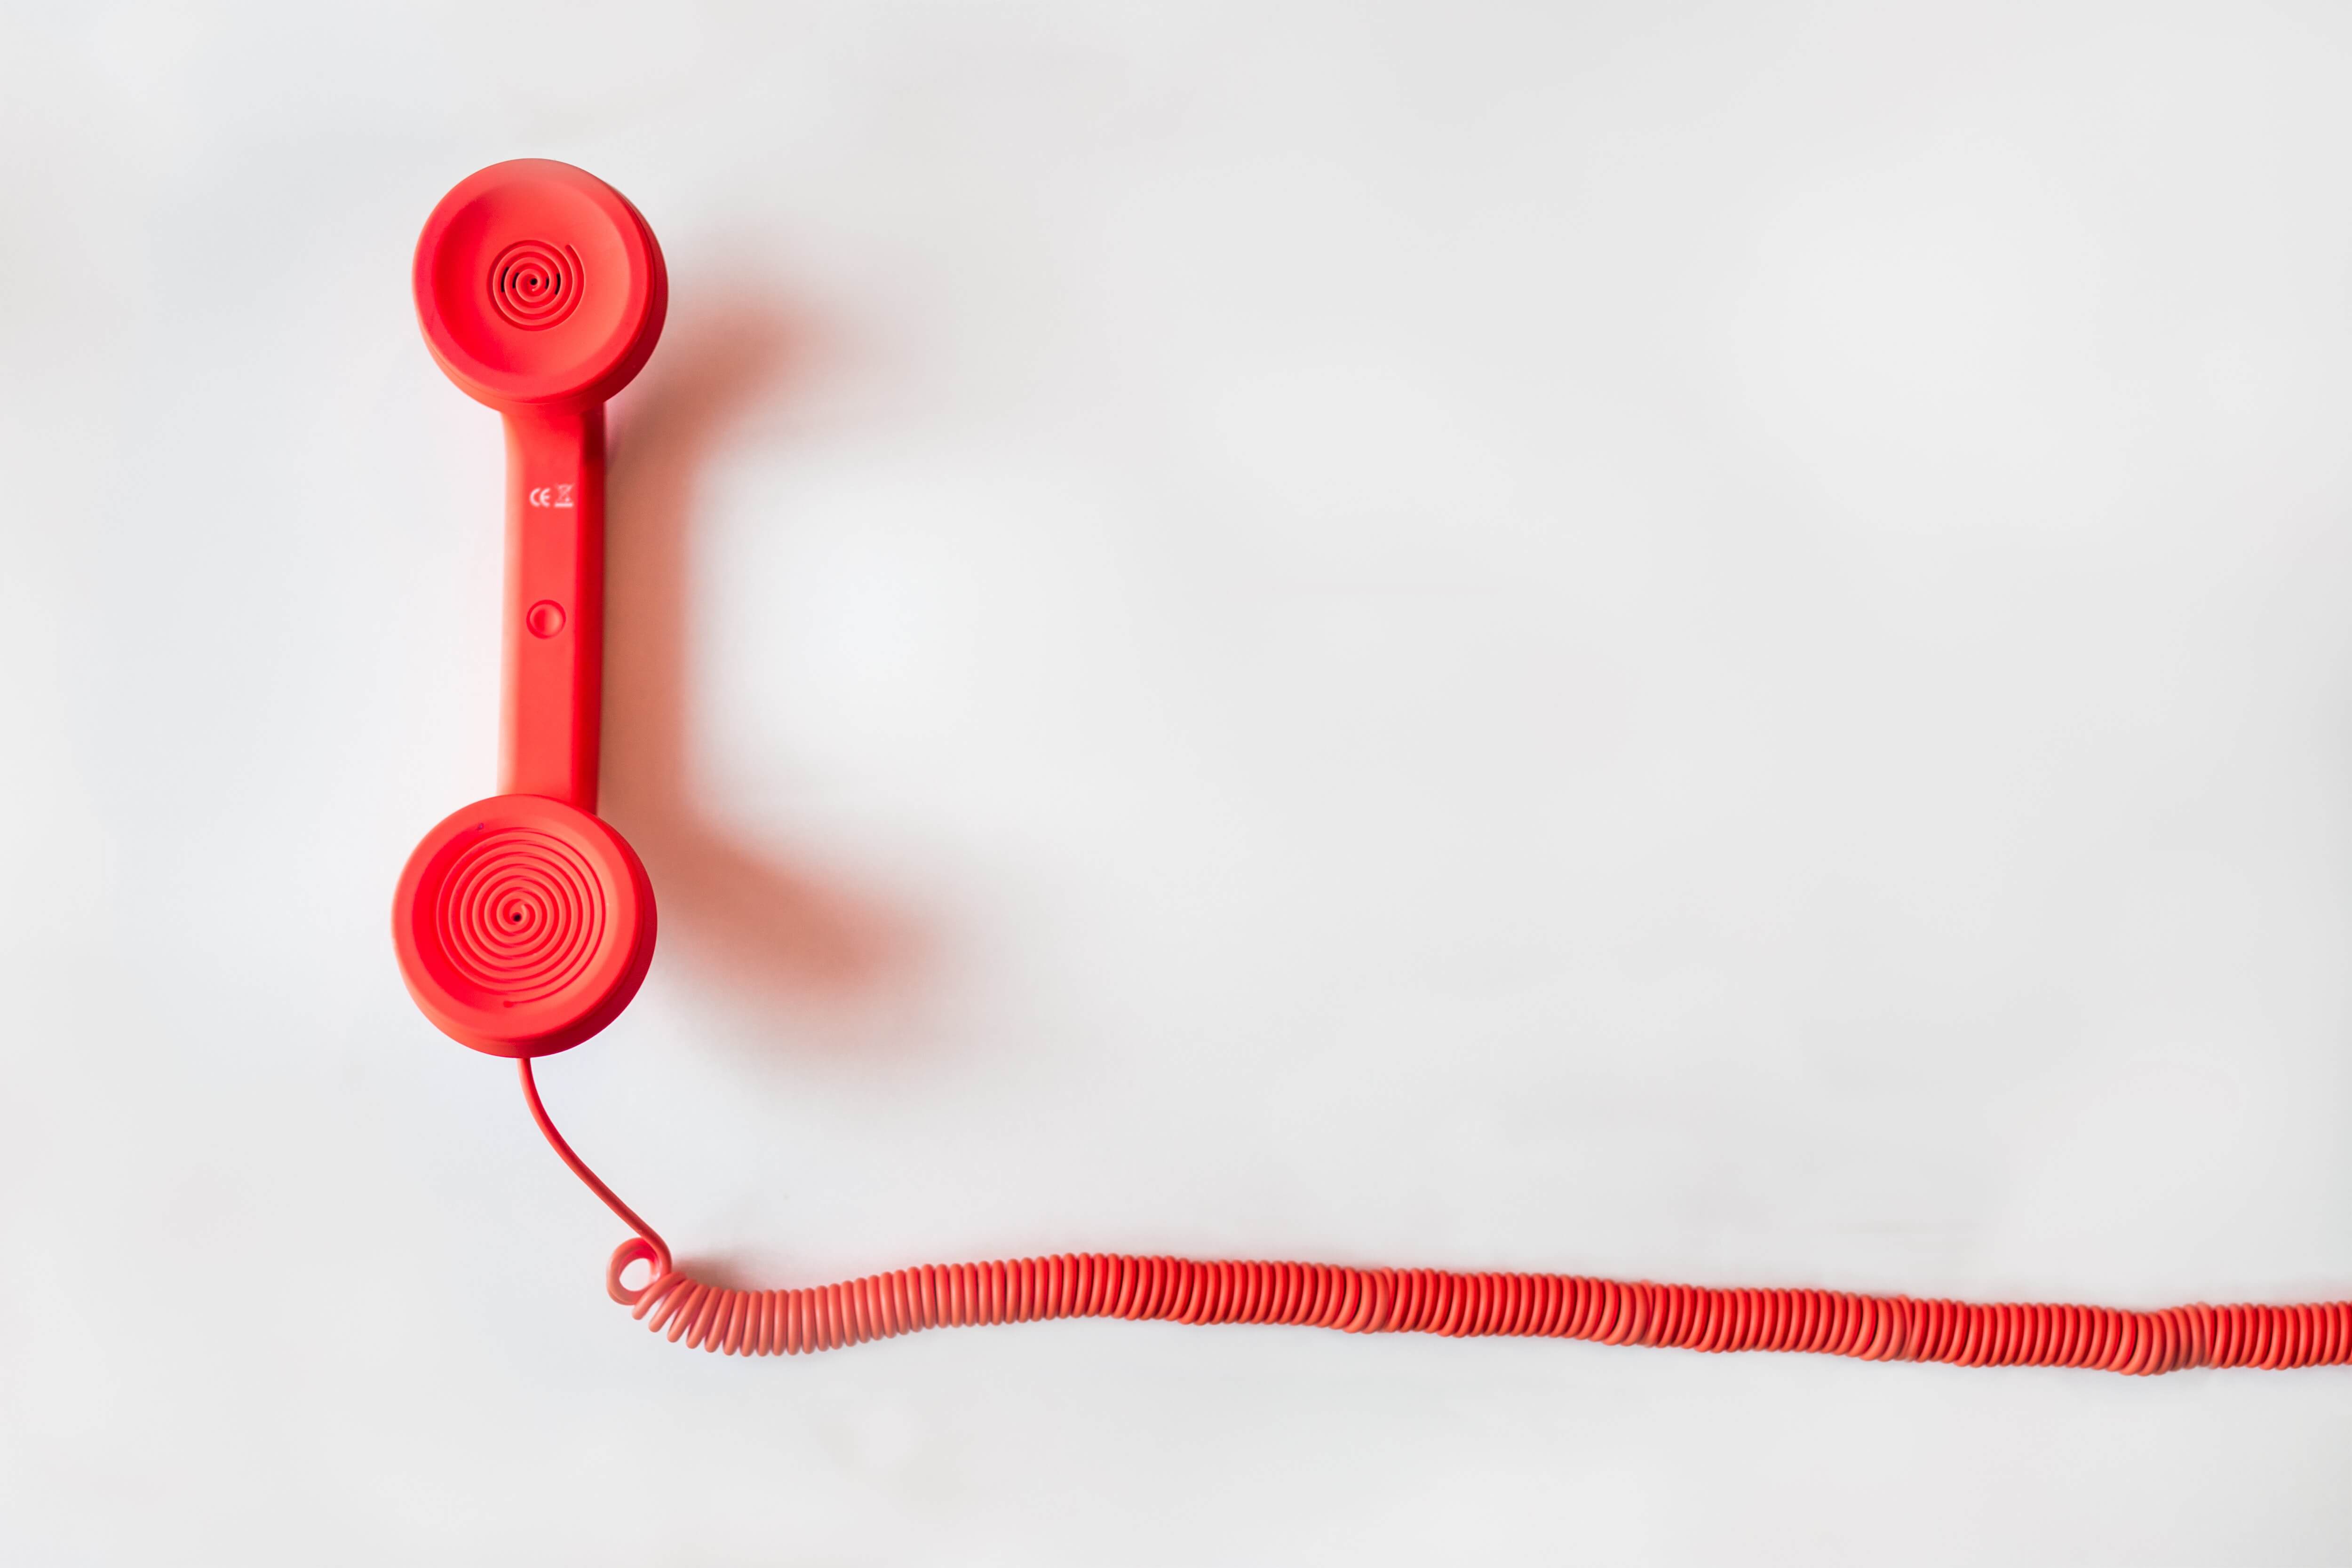 A red old-fashioned telephone off the hook